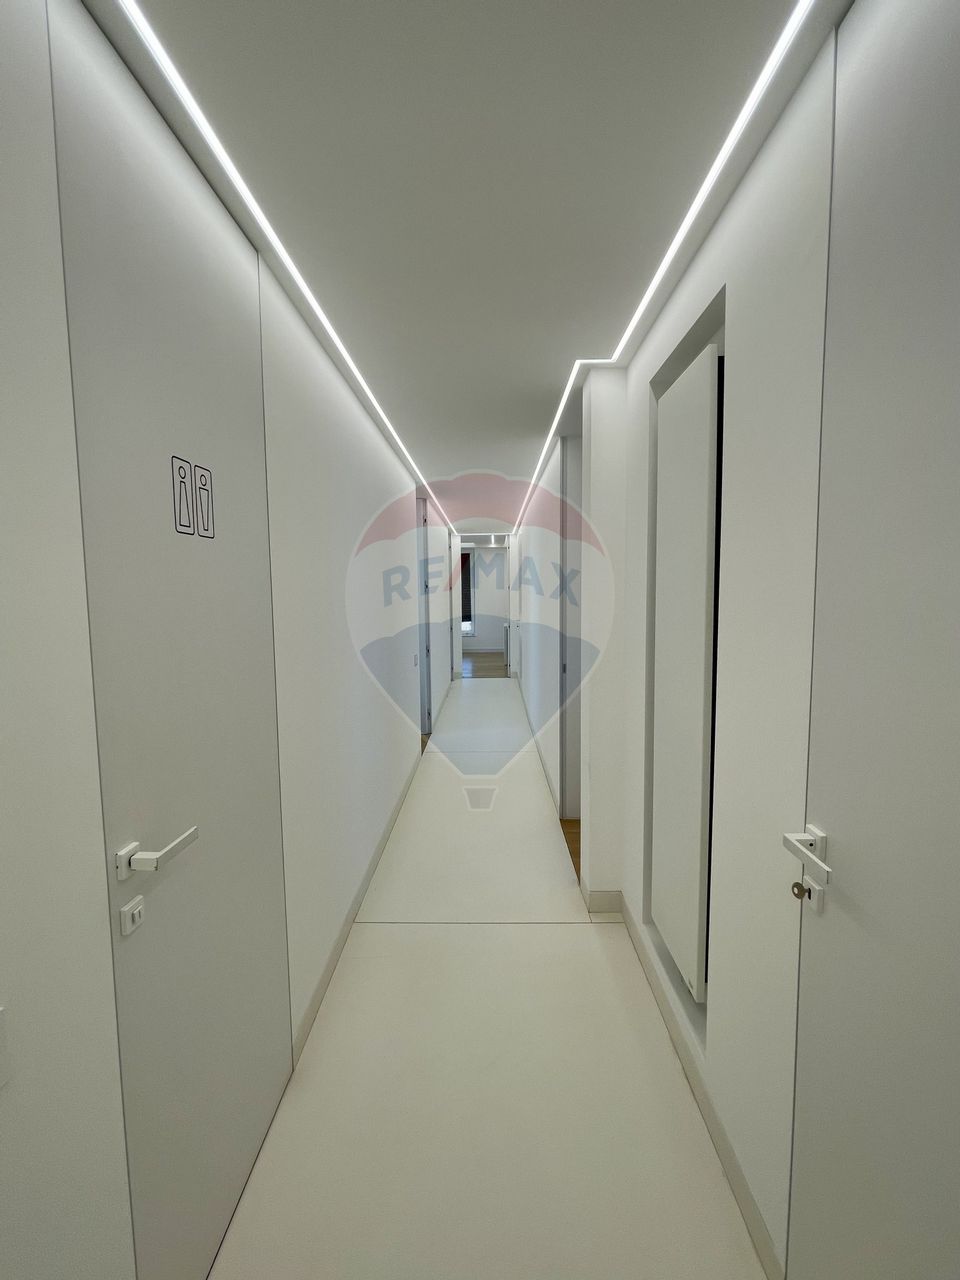 212.94sq.m Office Space for rent, Aviatorilor area